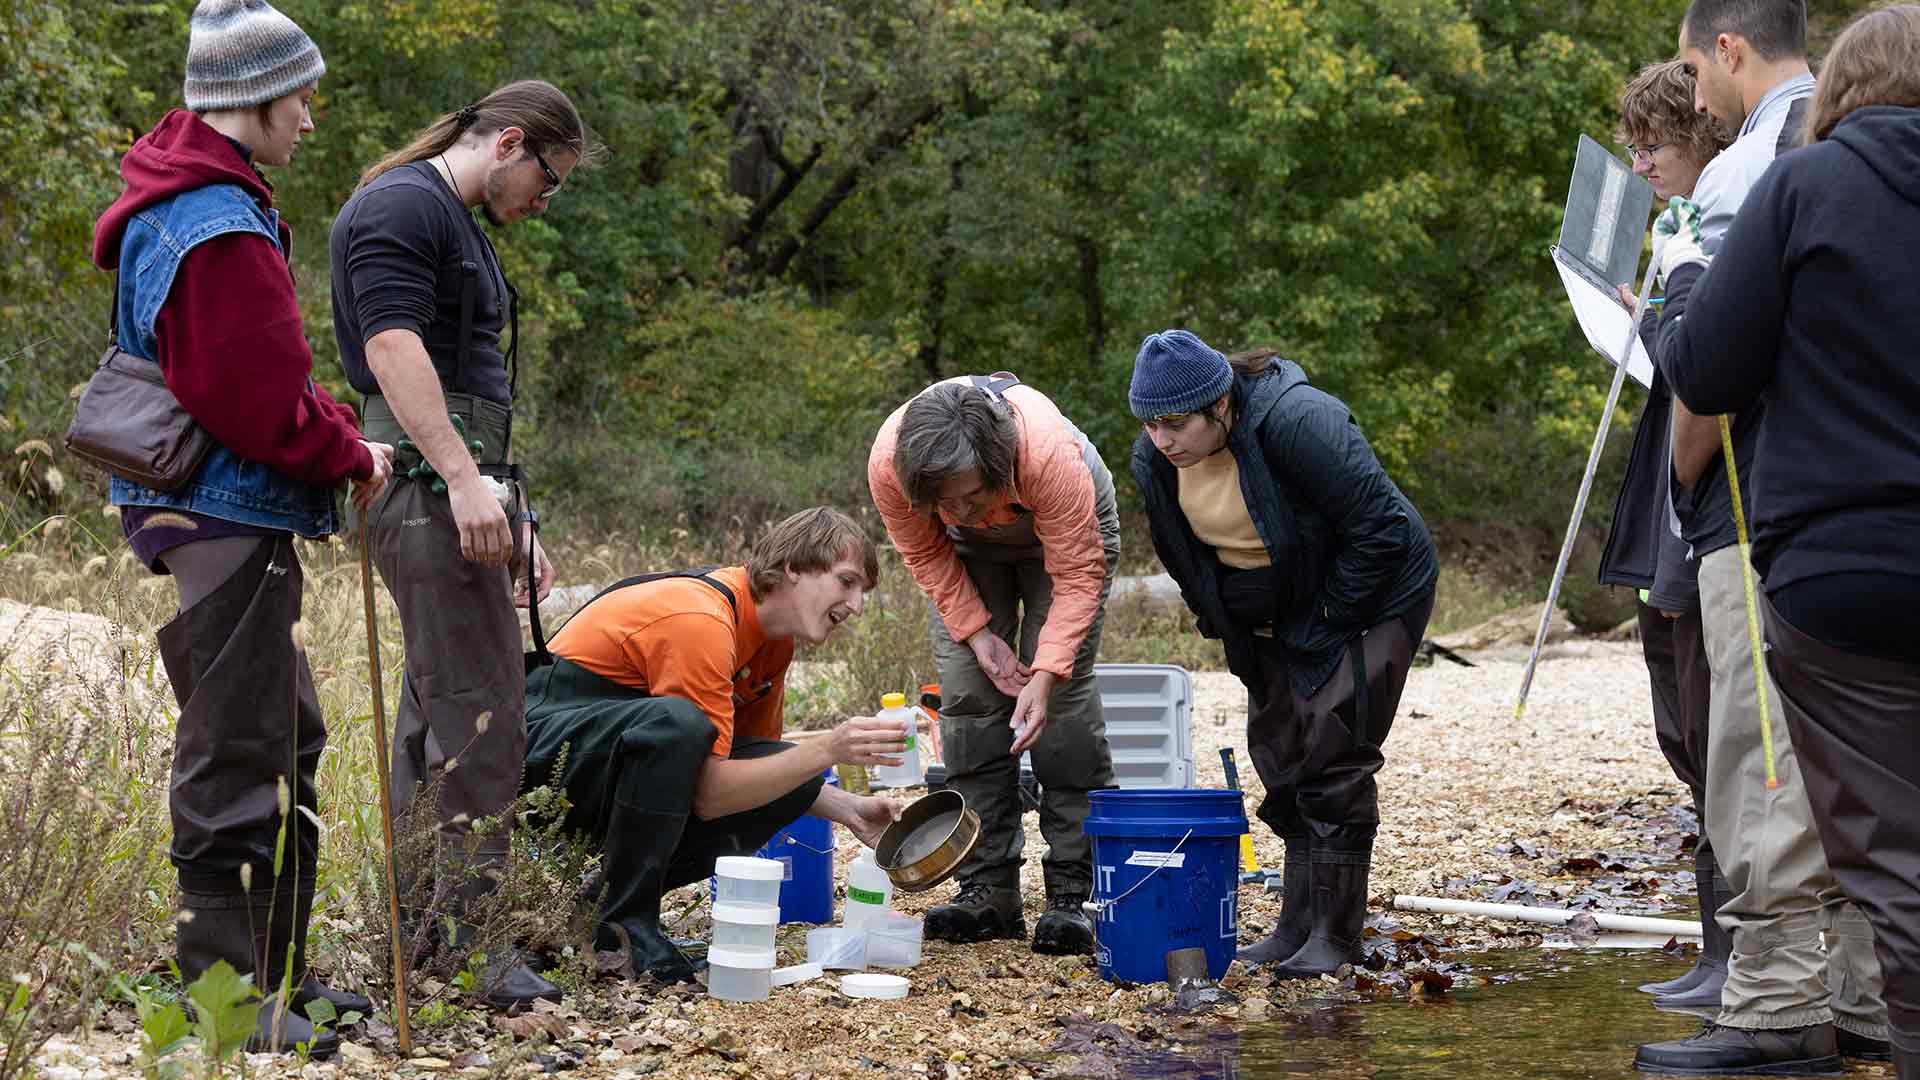 Biology professor Dr. Debra Finn and a group of students collect samples from a local creek for research.